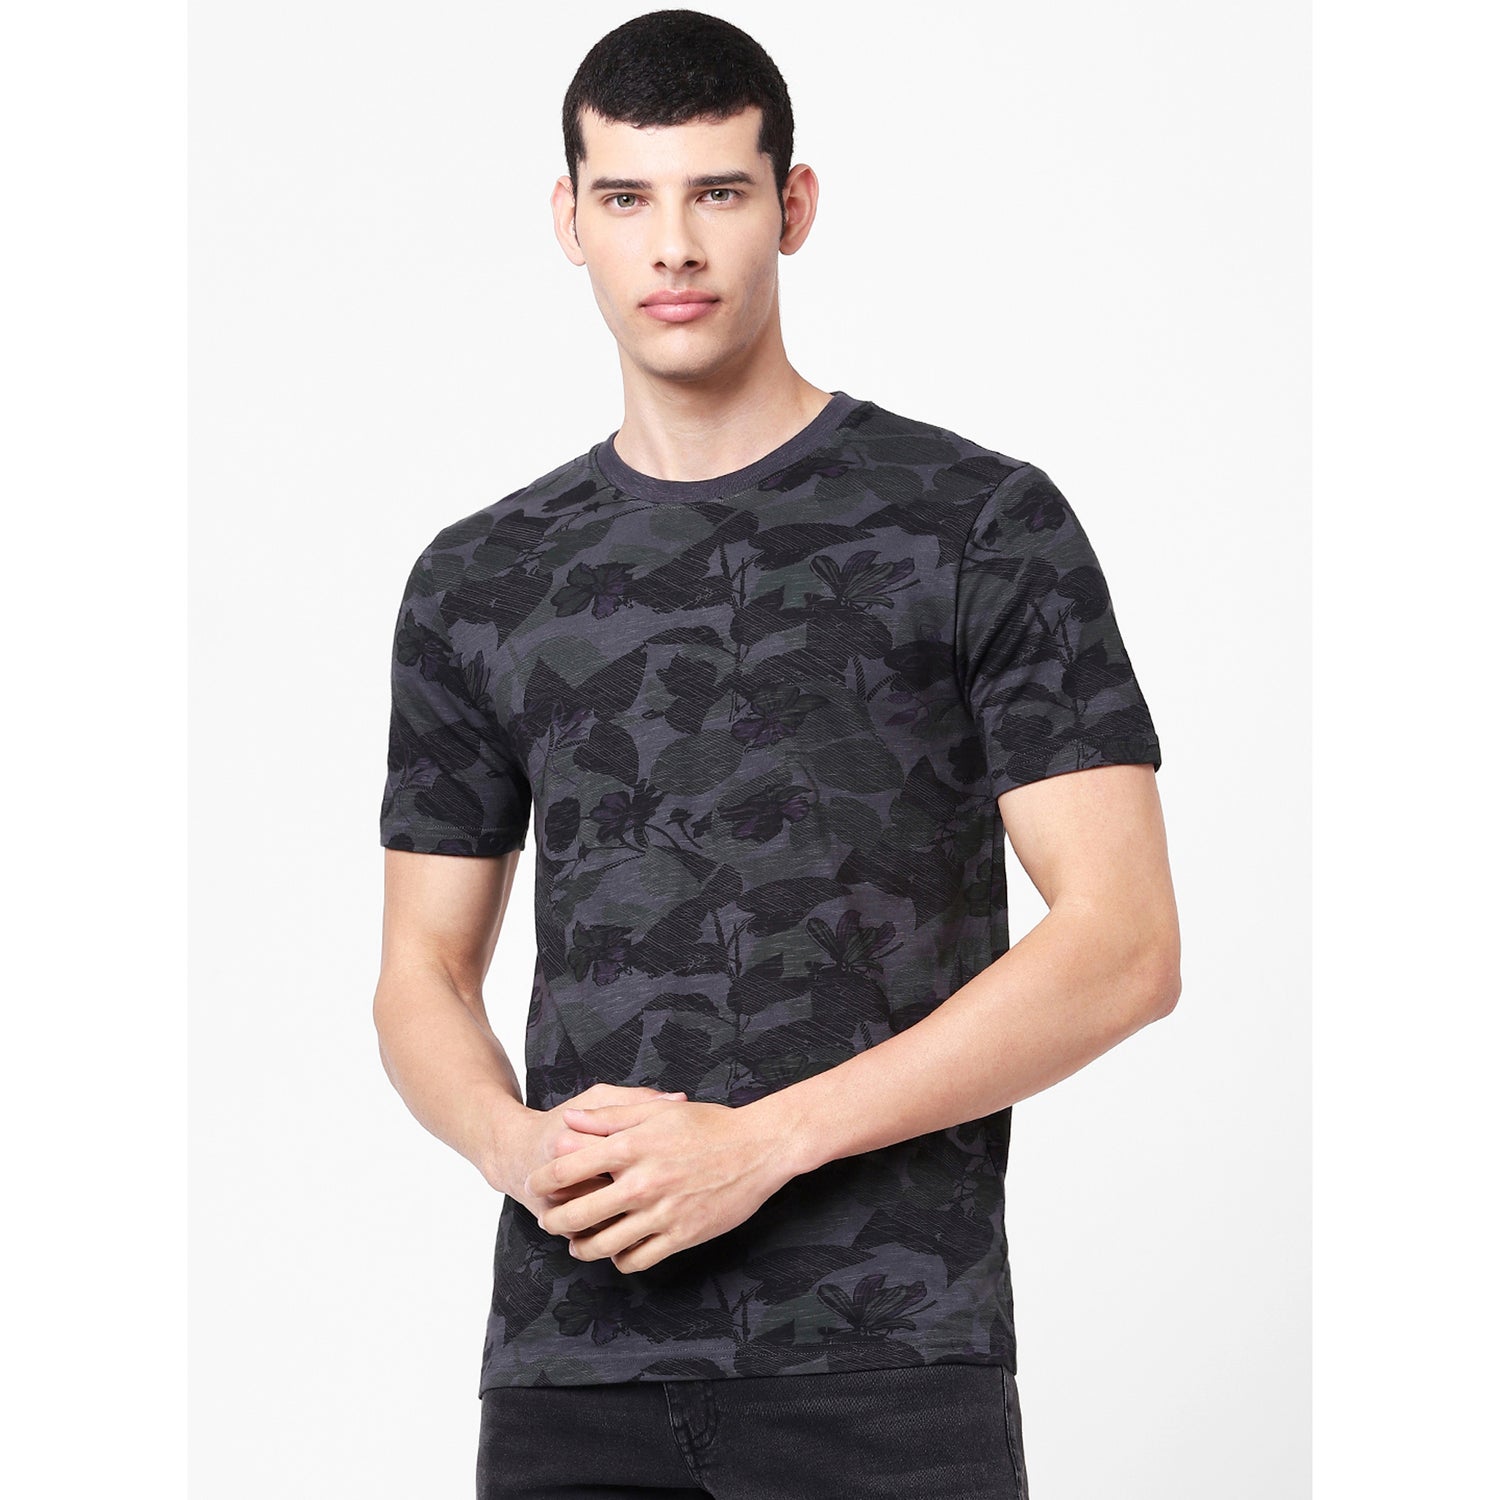 Green Camouflage Printed Cotton T-shirt (BELEAF)